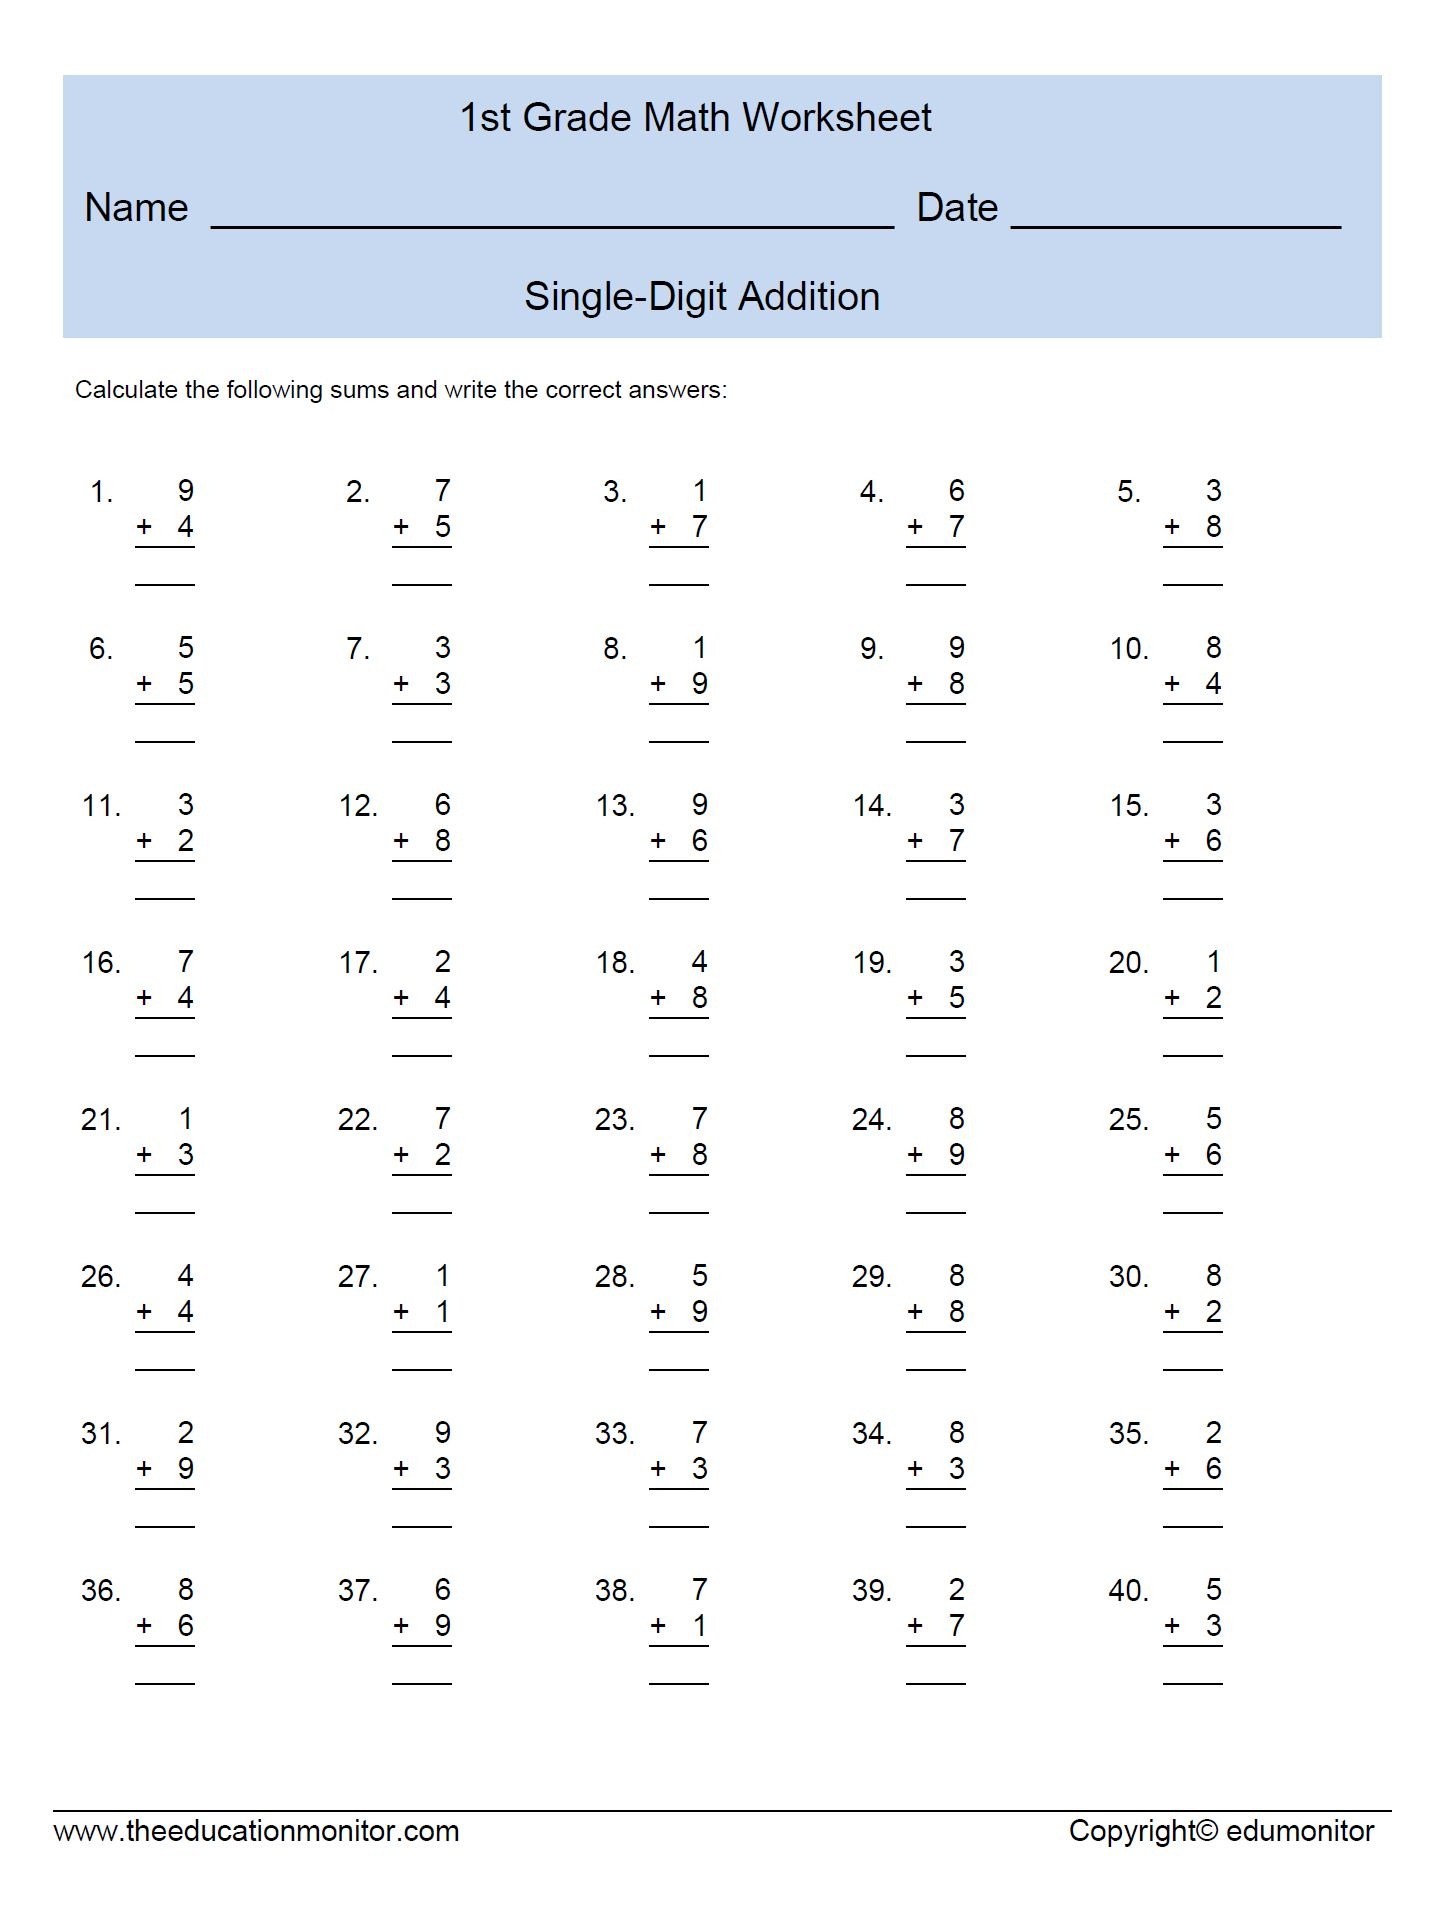 Single Digit Addition Worksheets For First Grade - Free Printable Addition Worksheets For 1St Grade